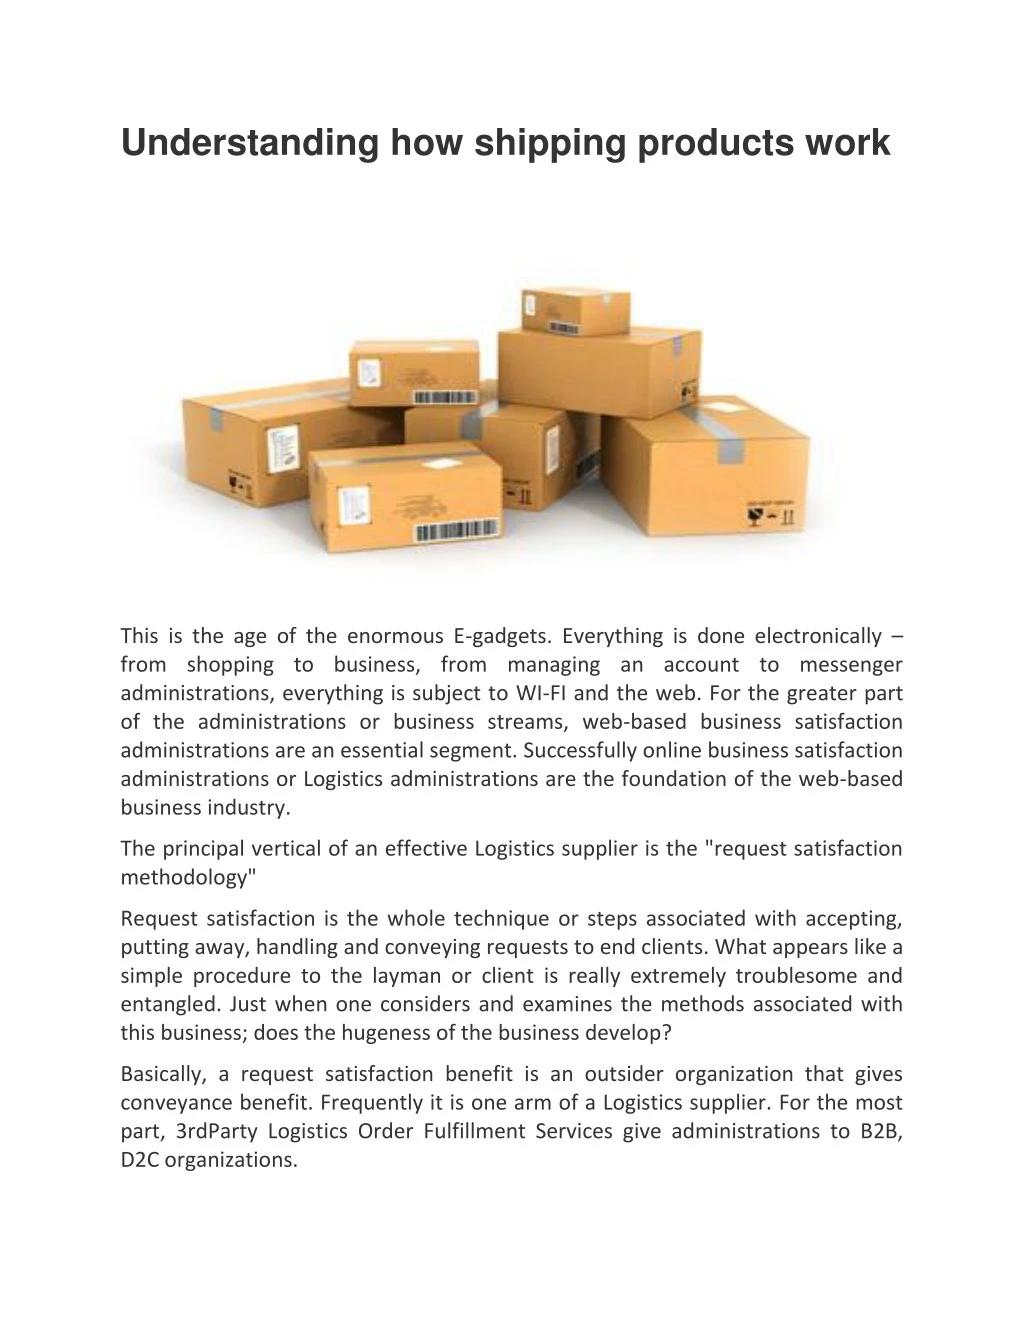 understanding how shipping products work